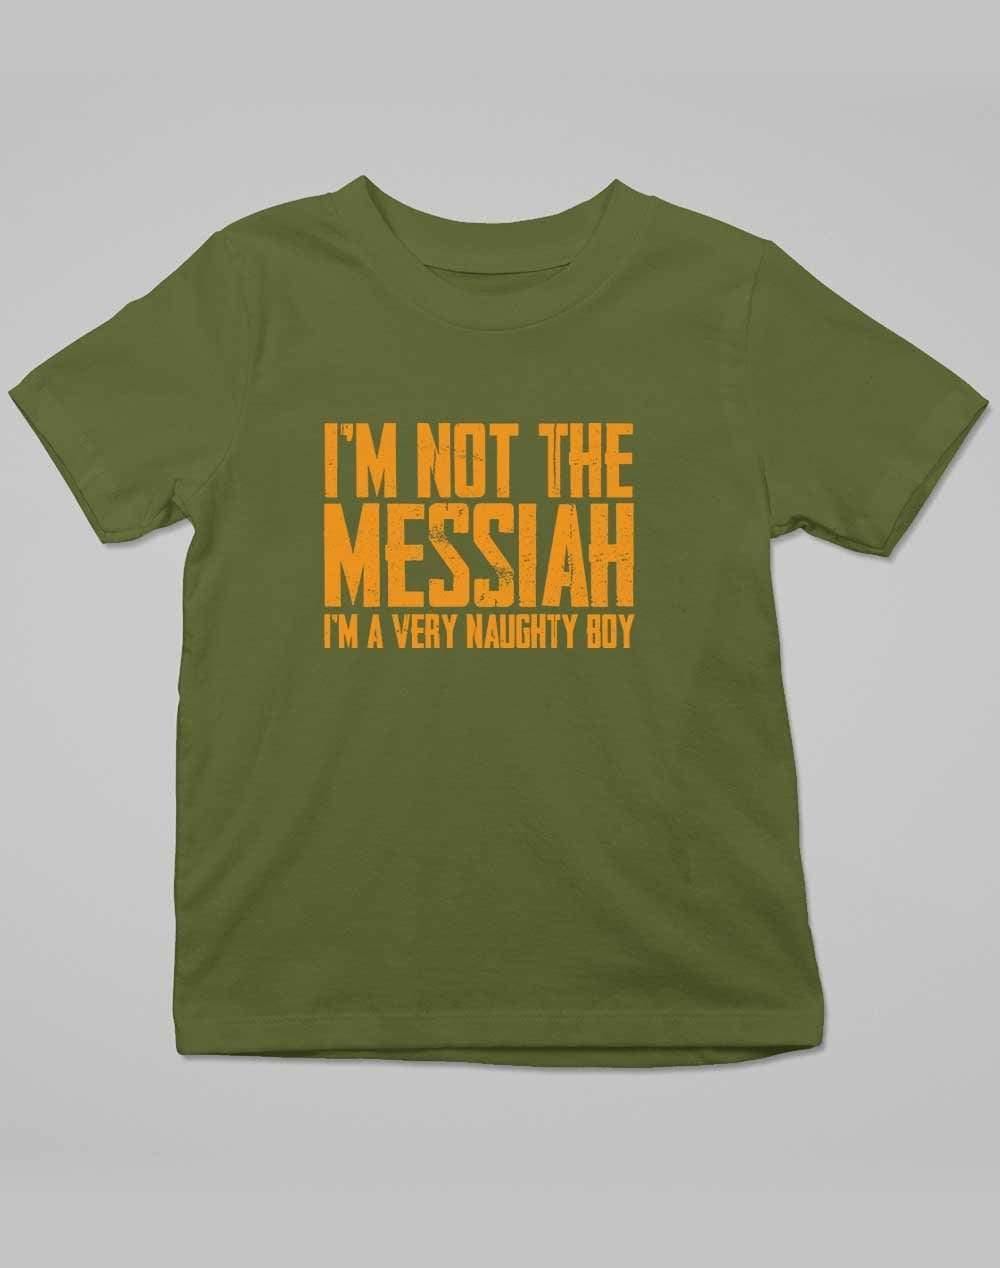 I'm Not the Messiah I'm a Very Naughty Boy Kids T-Shirt 3-4 years / Army  - Off World Tees